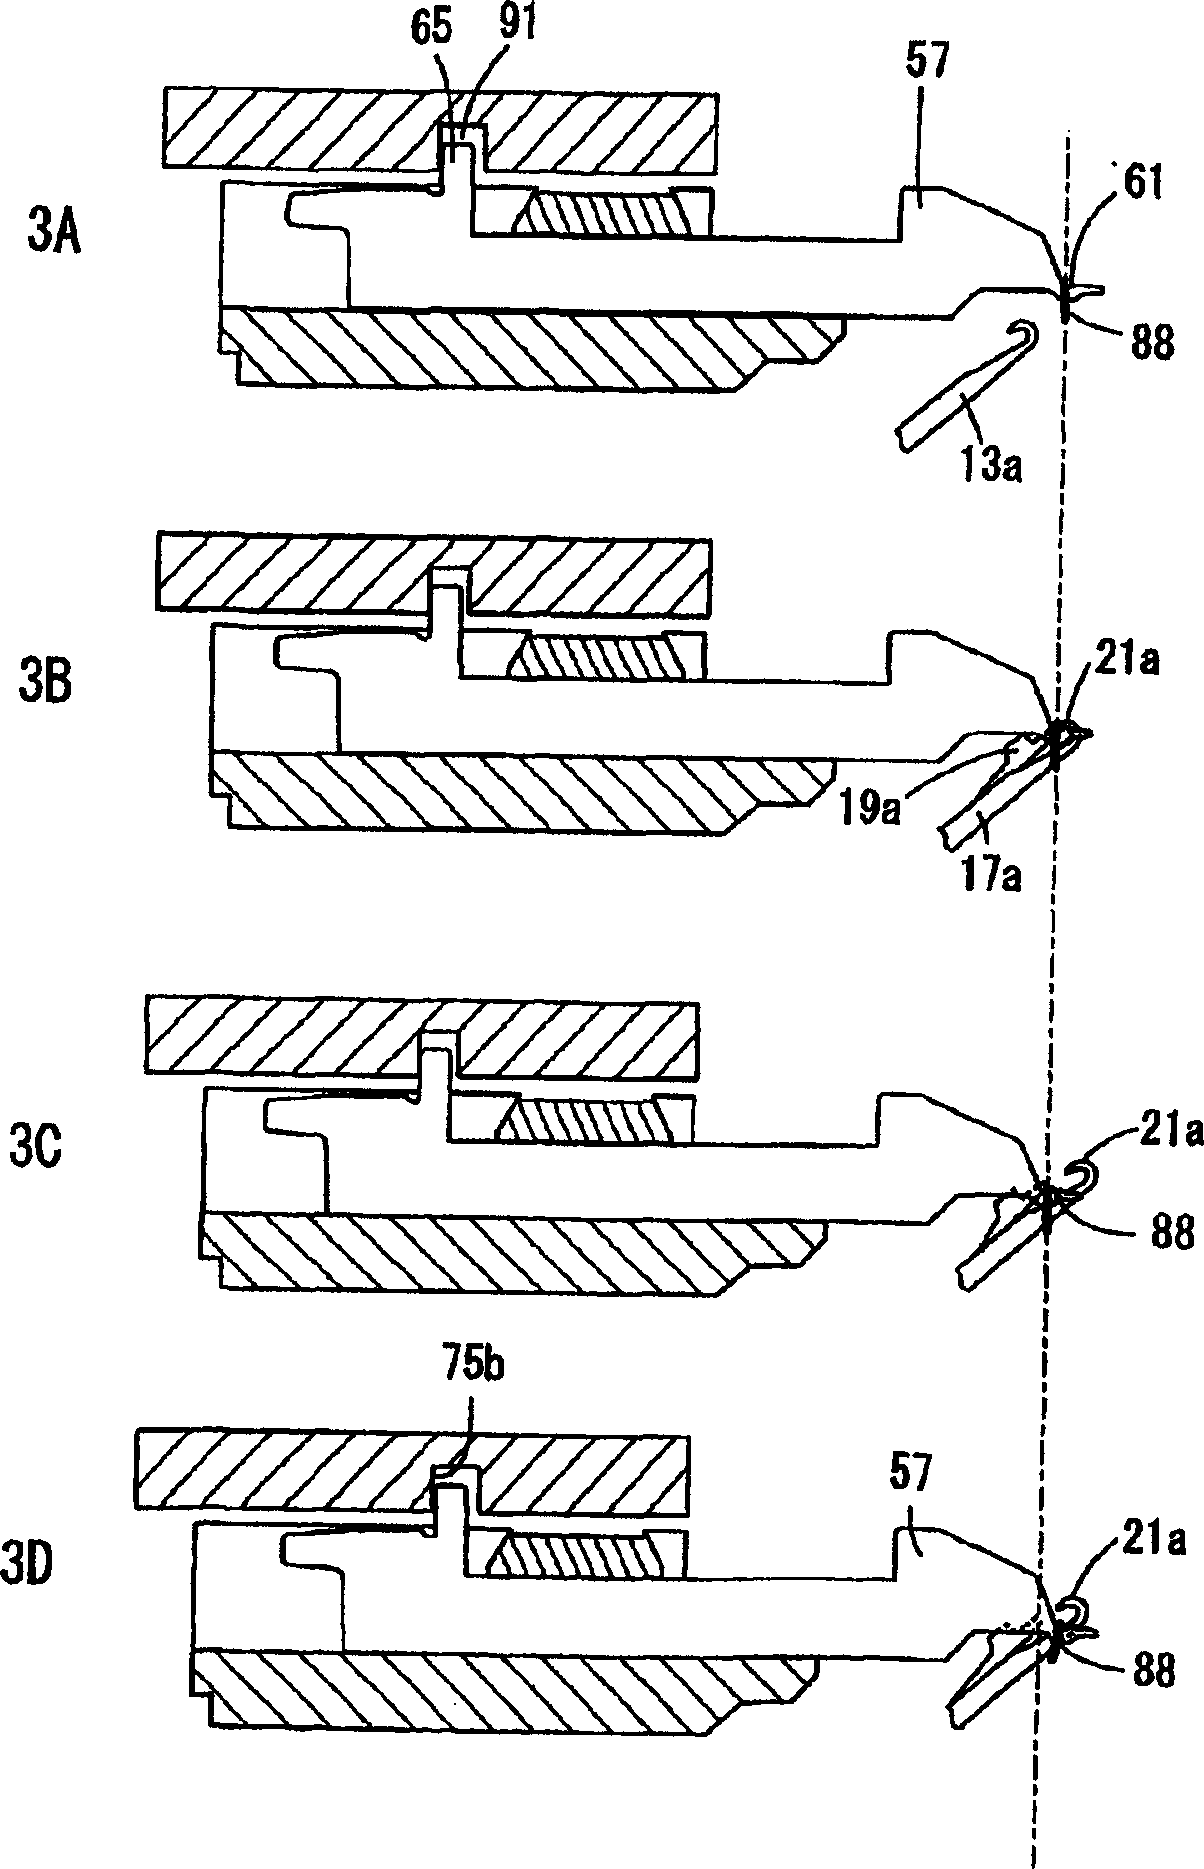 Weft knitting machine with transfer mechanism and transferring method